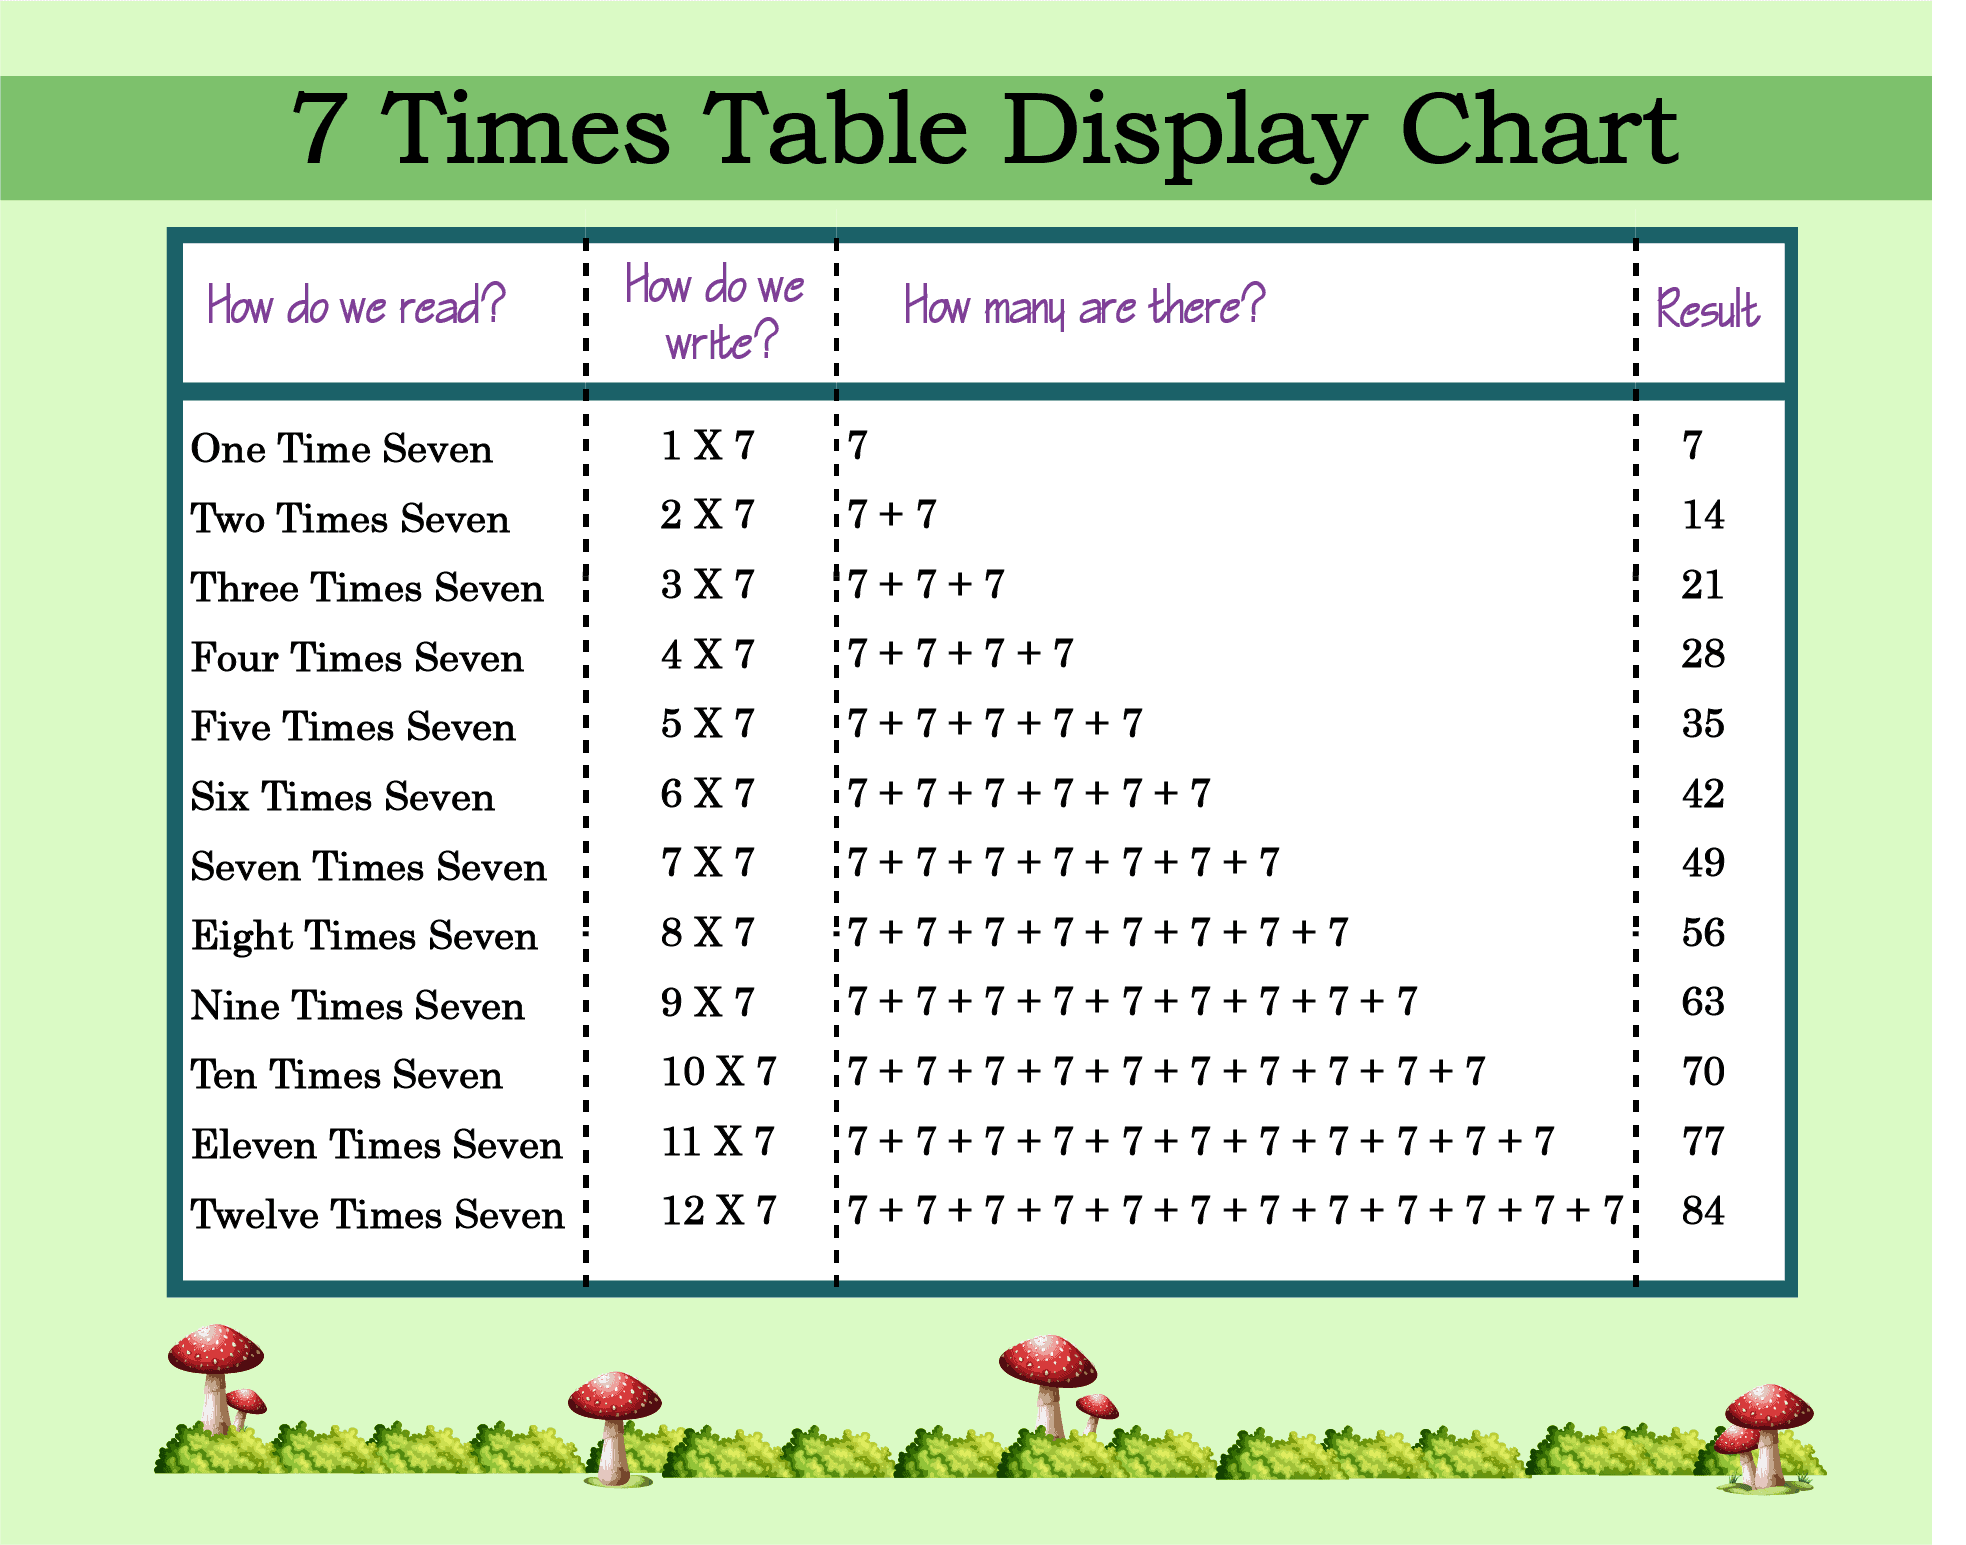 7 Times Table Display Chart overview